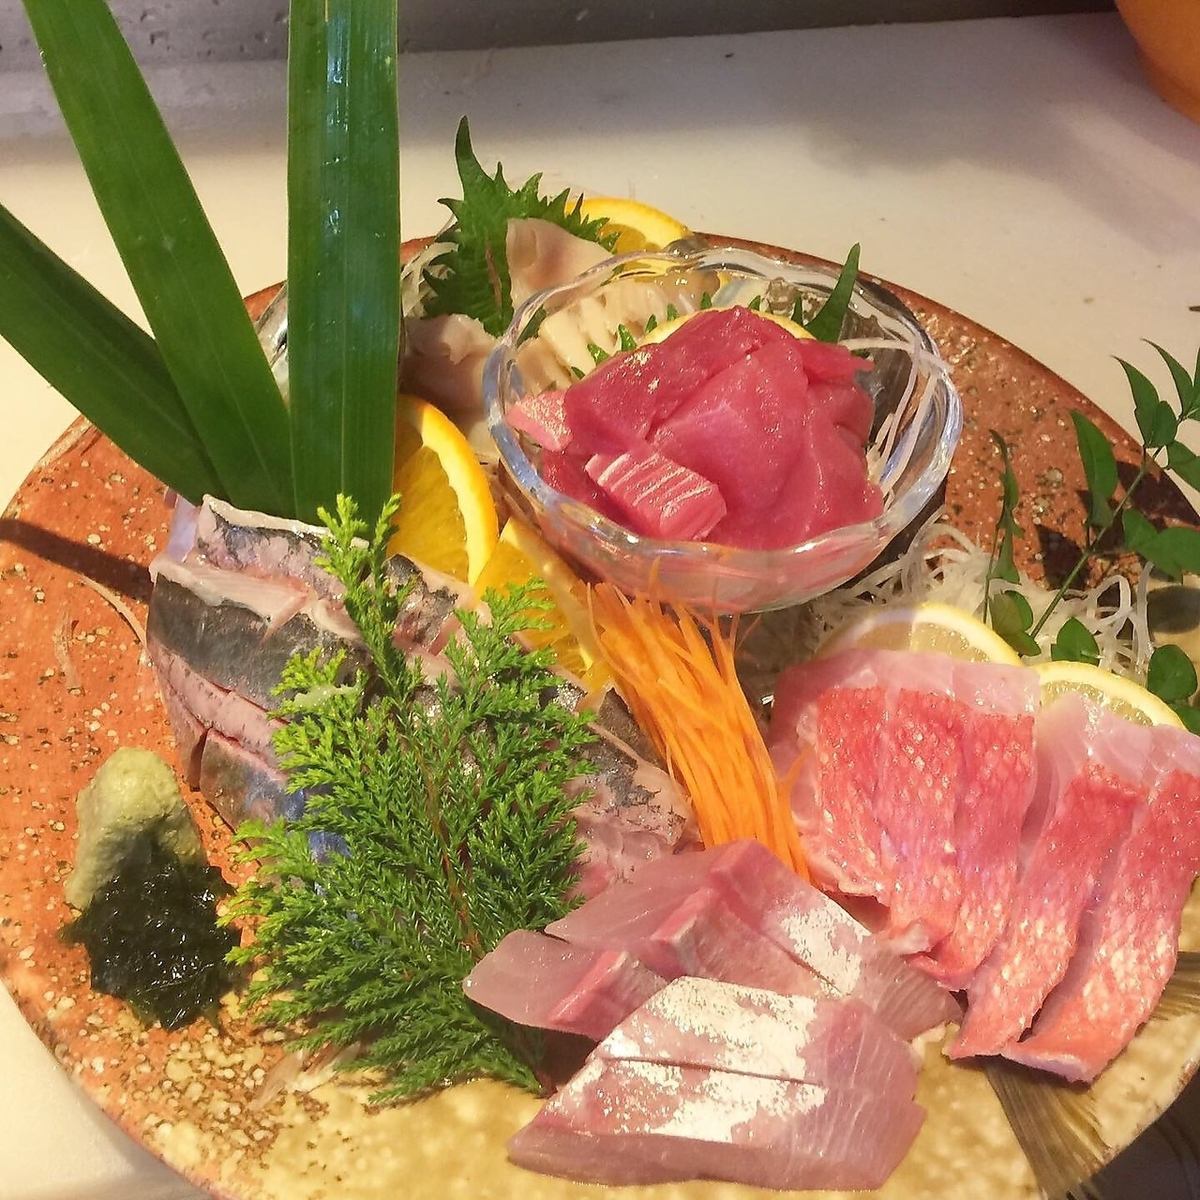 Seafood dishes such as sashimi platter and horse mackerel namero are recommended!